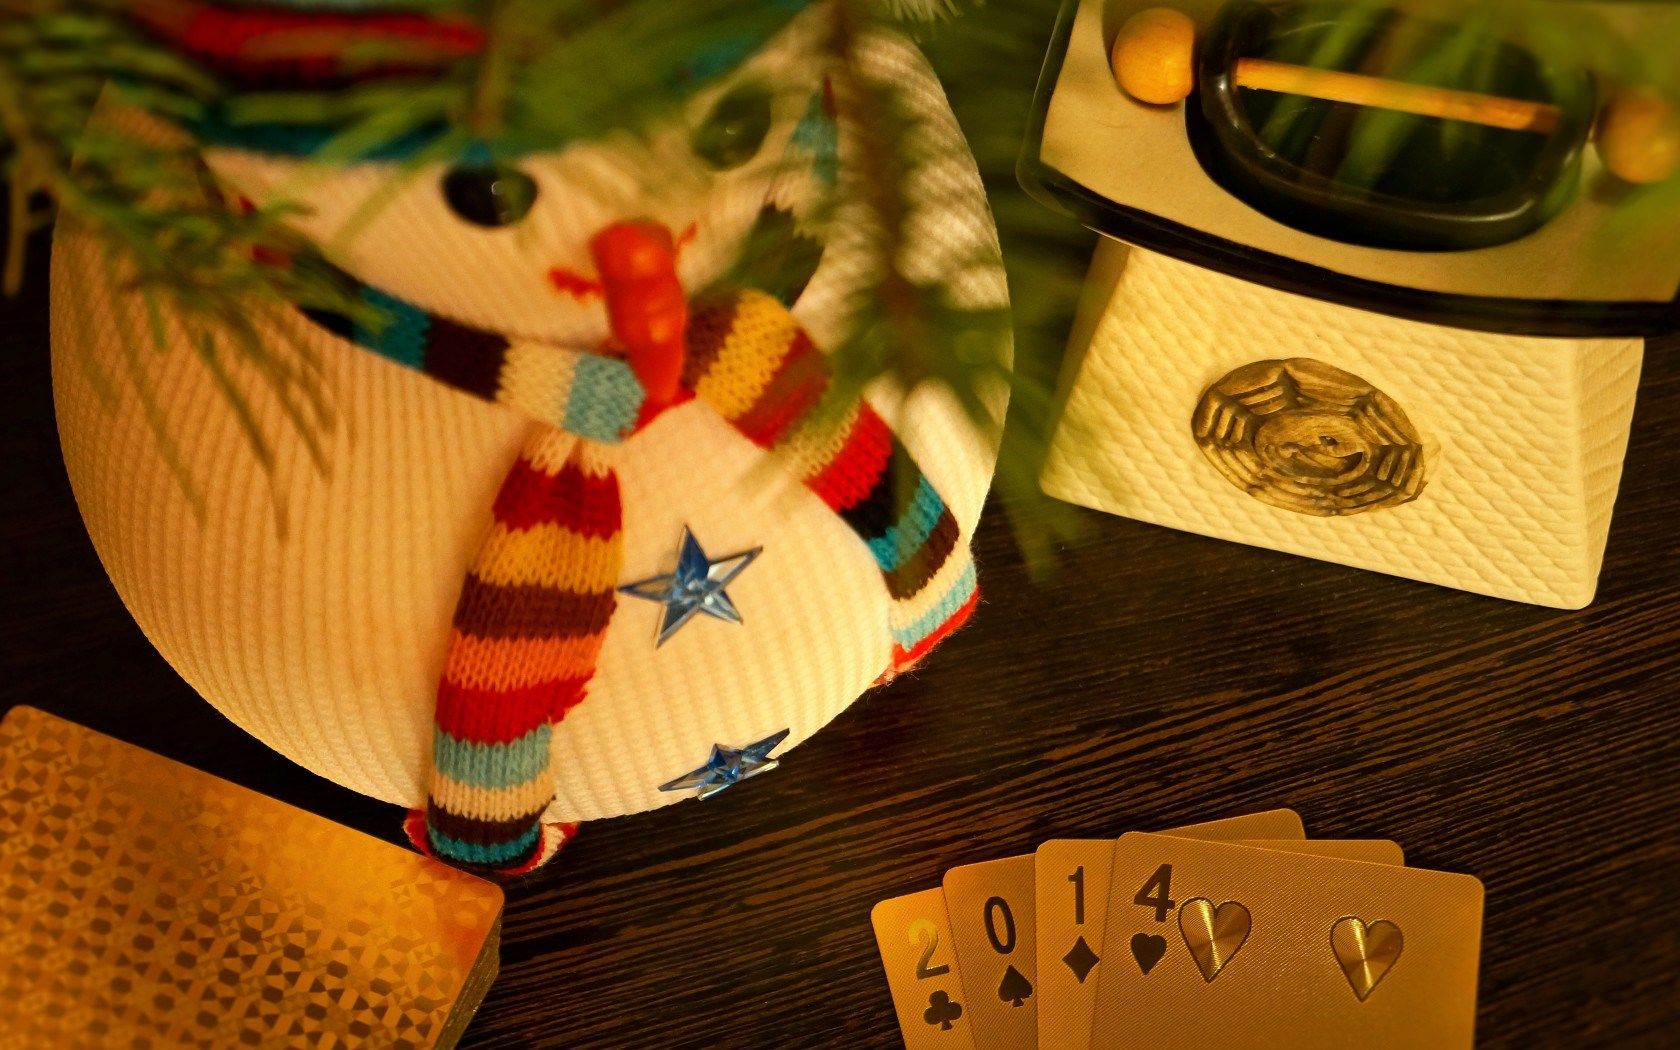 HD wallpaper, Poker, Year, Cards, Game, Snowman, 2014, Luxury, Gold, New